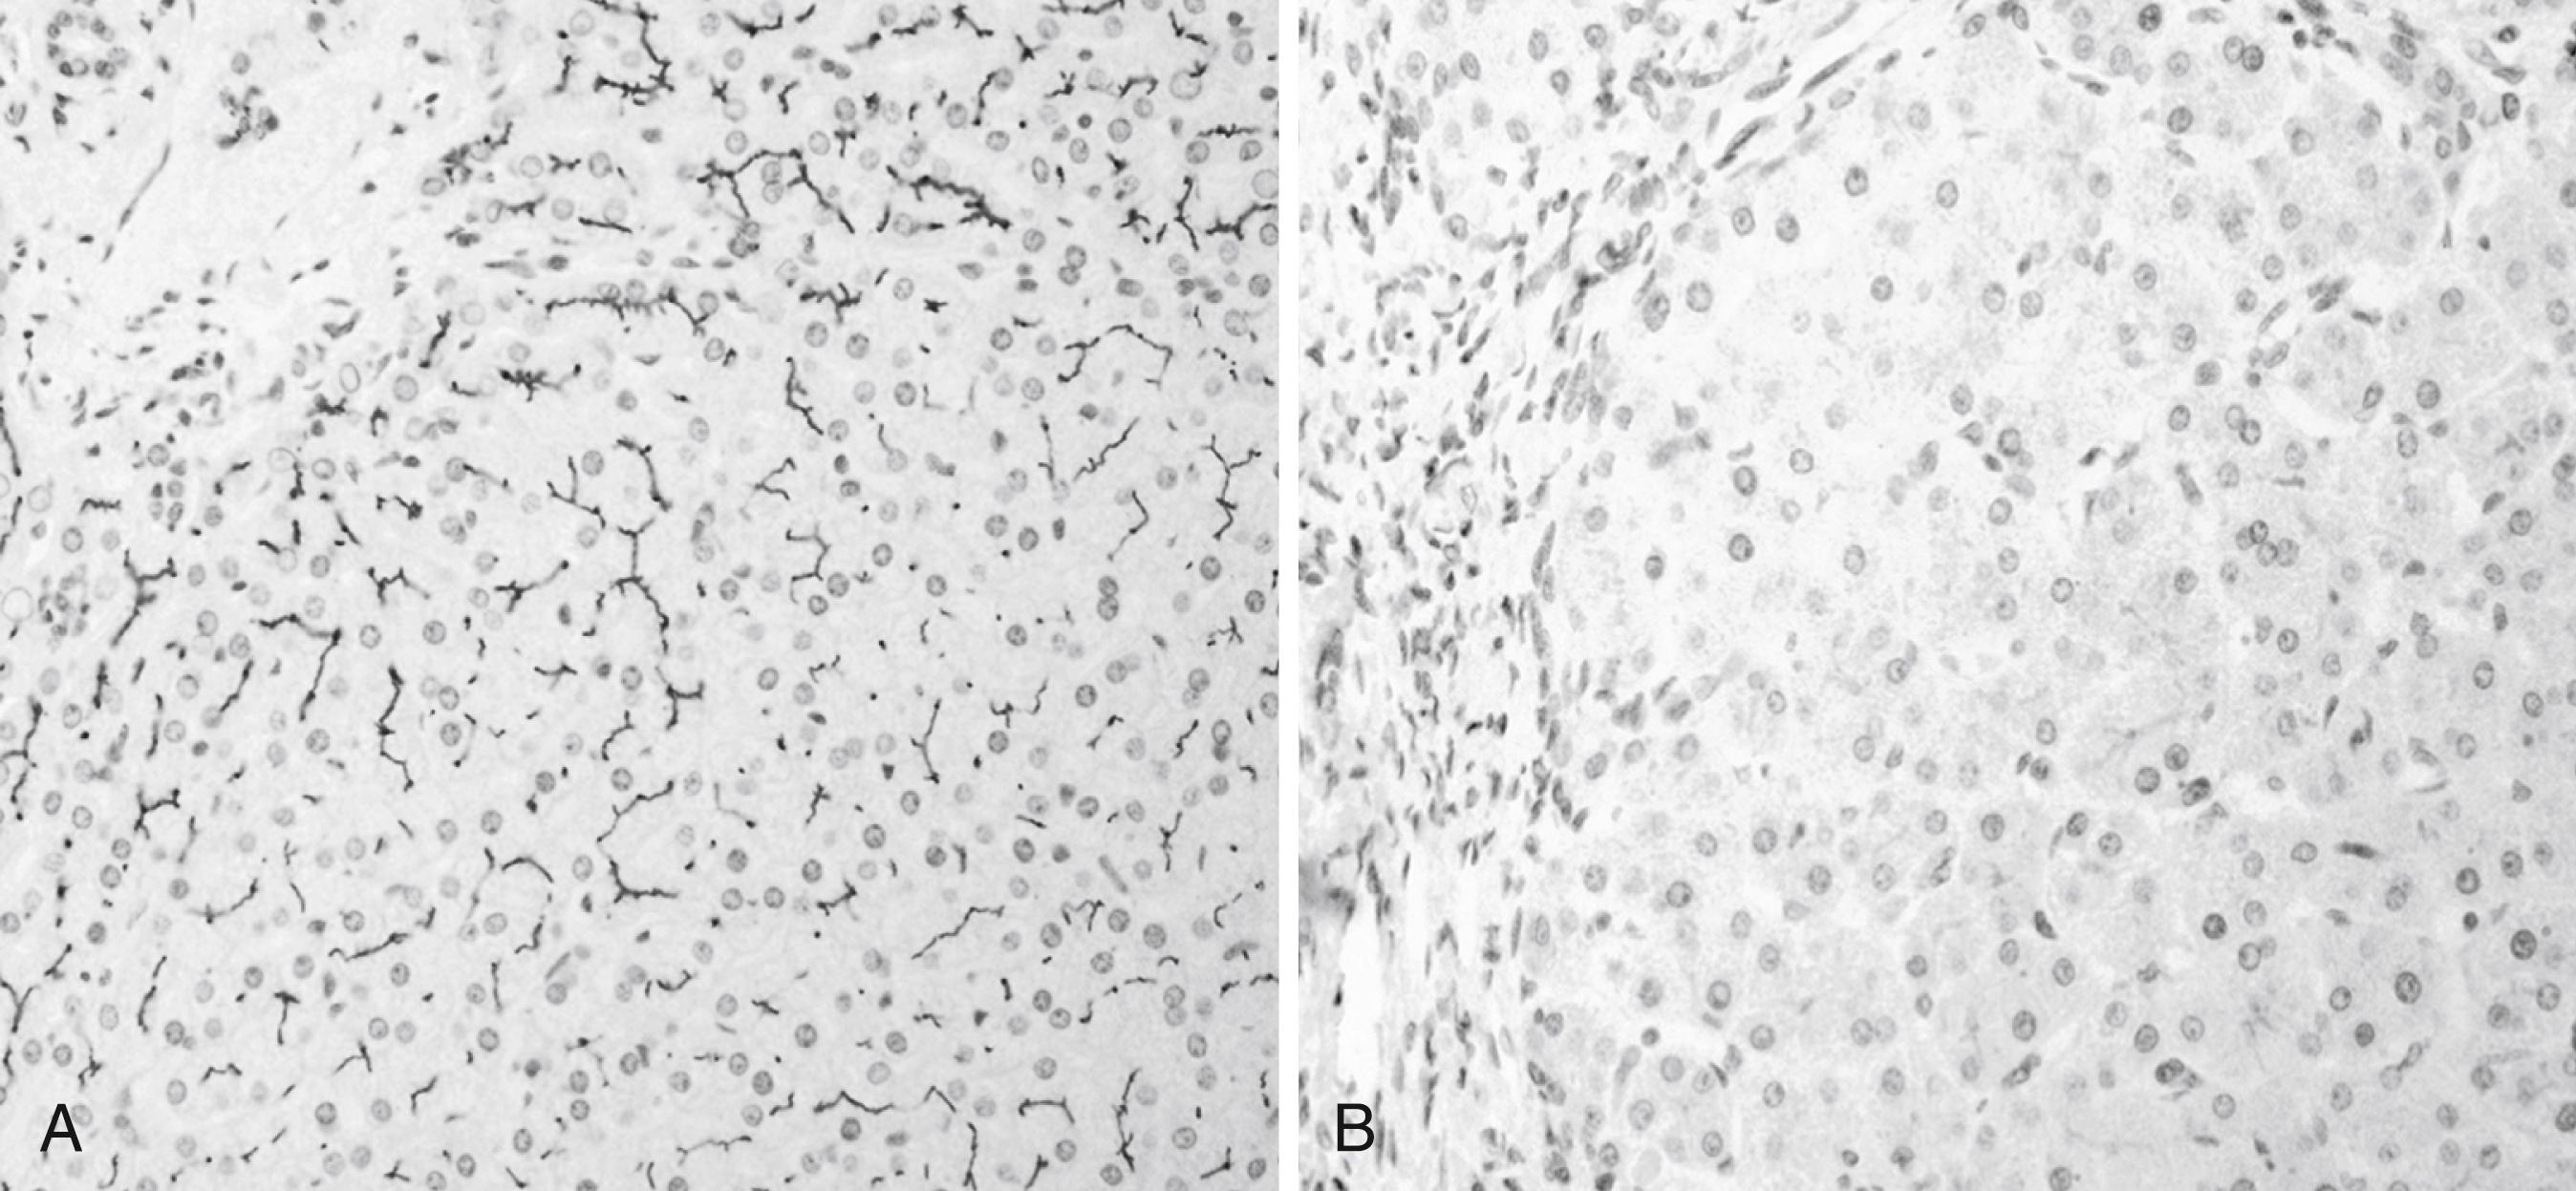 Fig. 70.4, Hepatic immunohistochemical staining for bile salt export pump (BSEP) expression reveals (A) normal expression in a control liver versus (B) no staining in the liver of a progressive familial intrahepatic cholestasis type 2 (BSEP deficiency) patient.